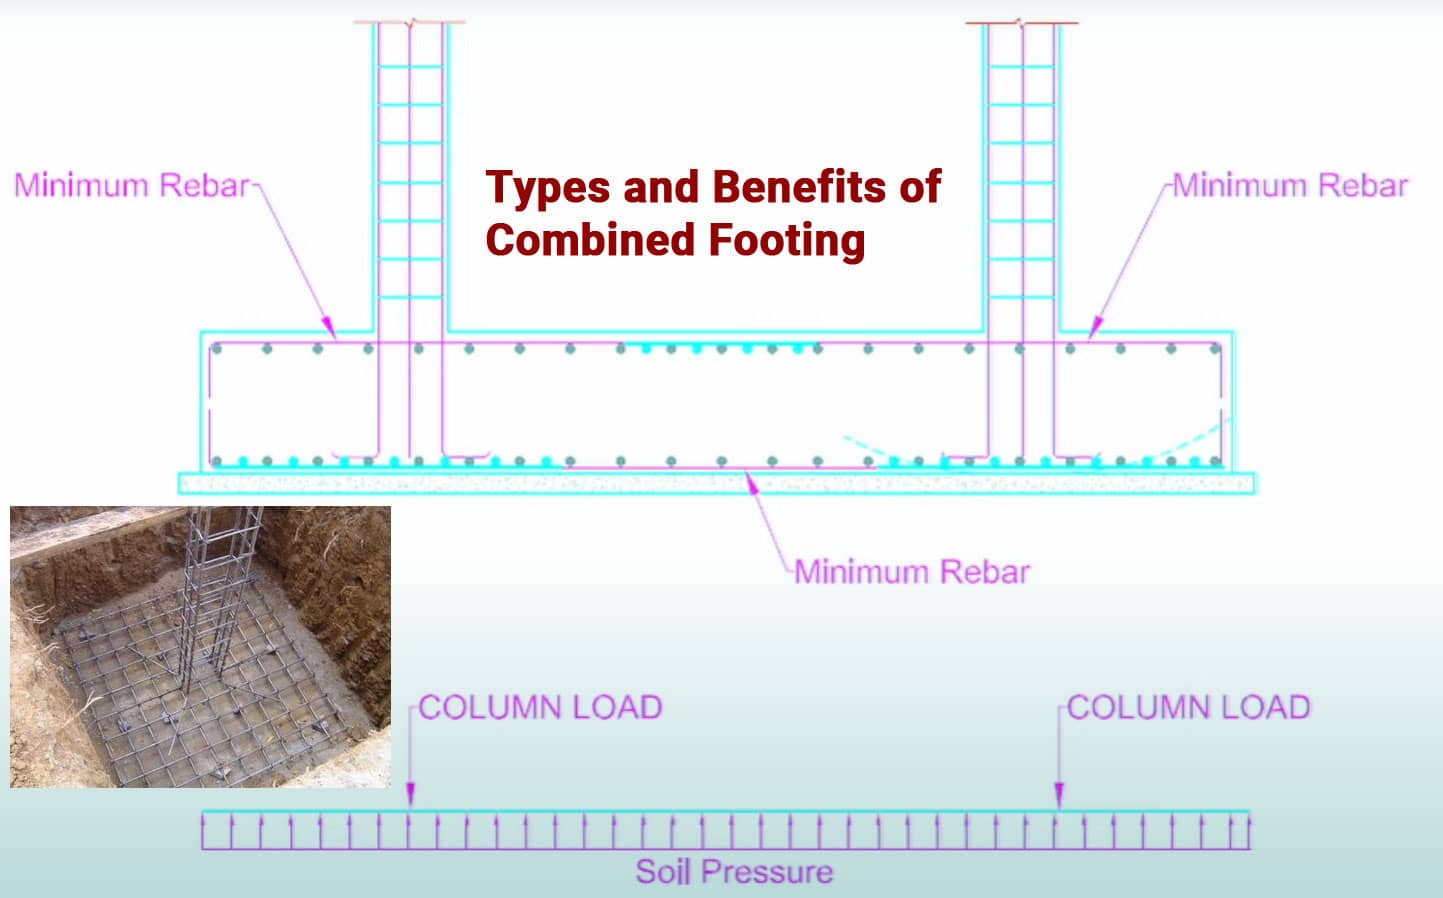 Types and Benefits of Combined Footing